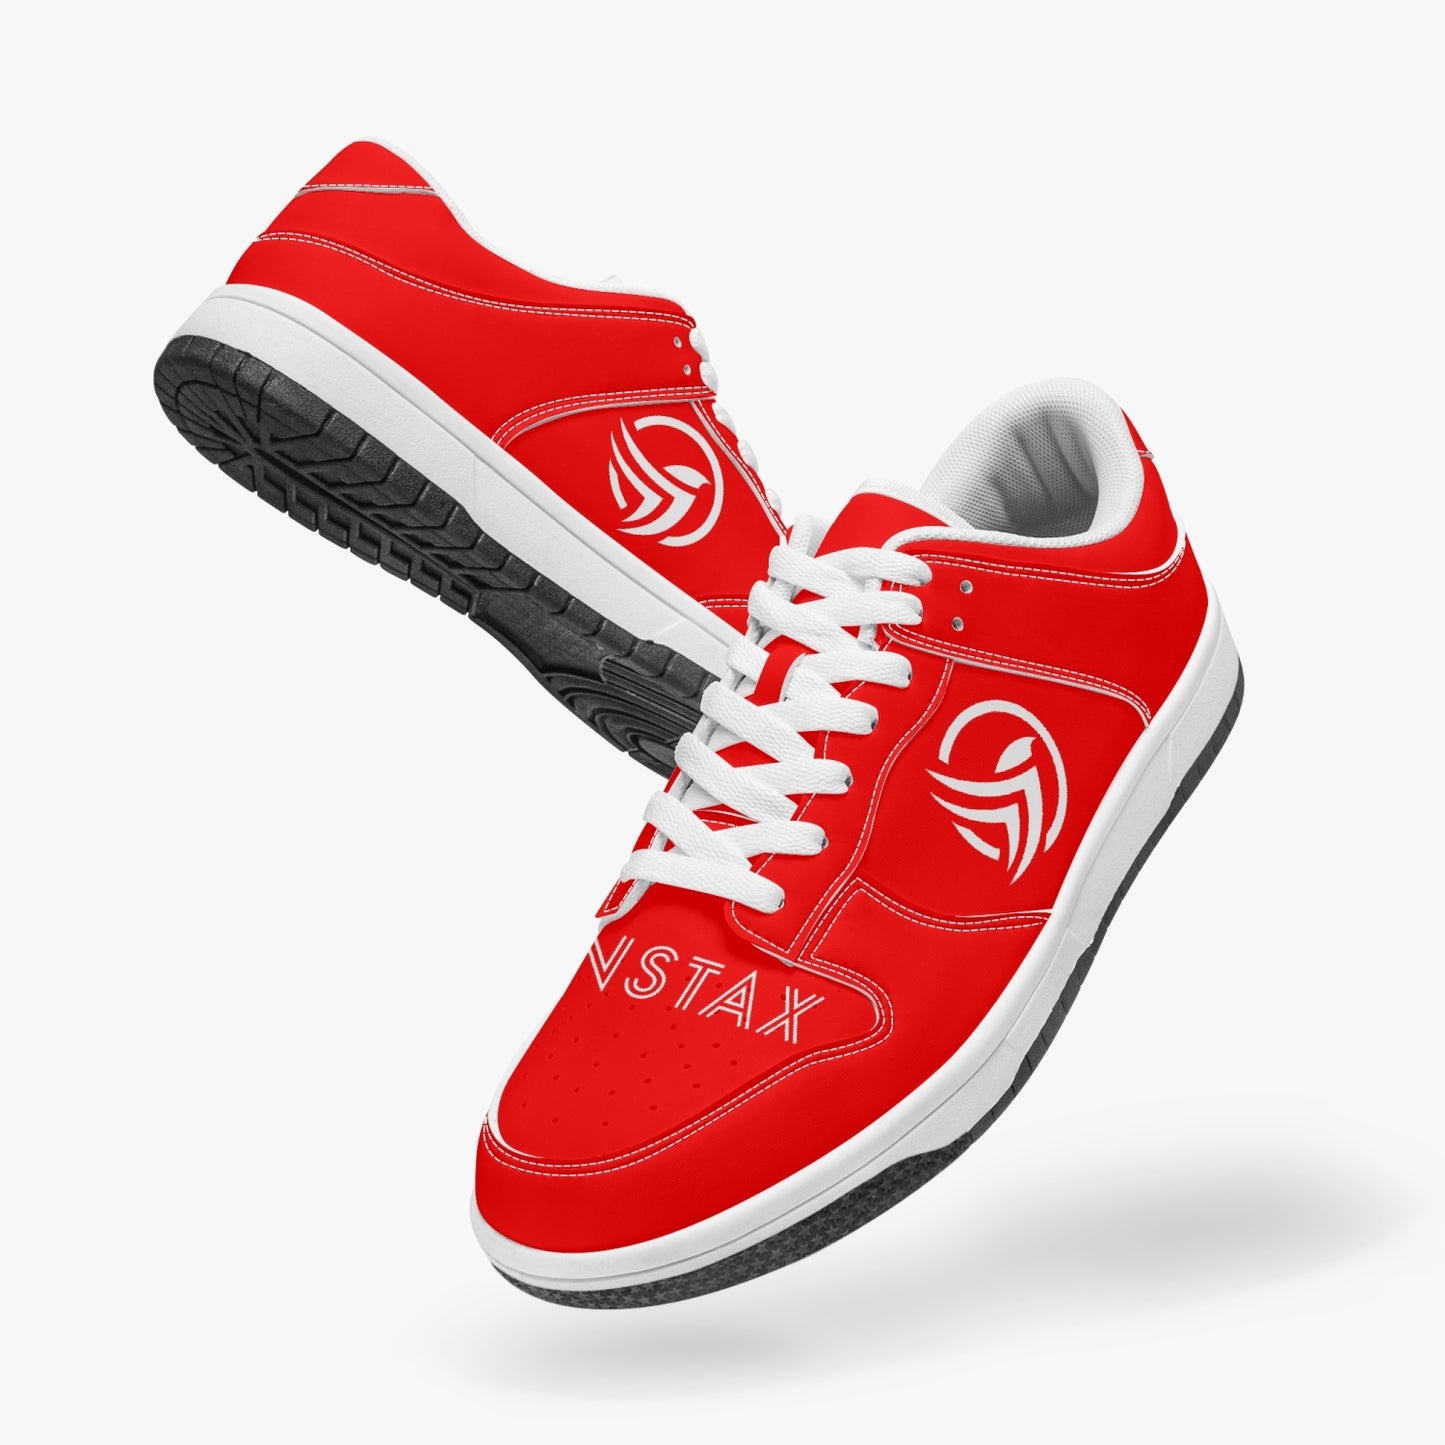 Unstax Red Dunk Stylish Low-Top Leather Sneakers